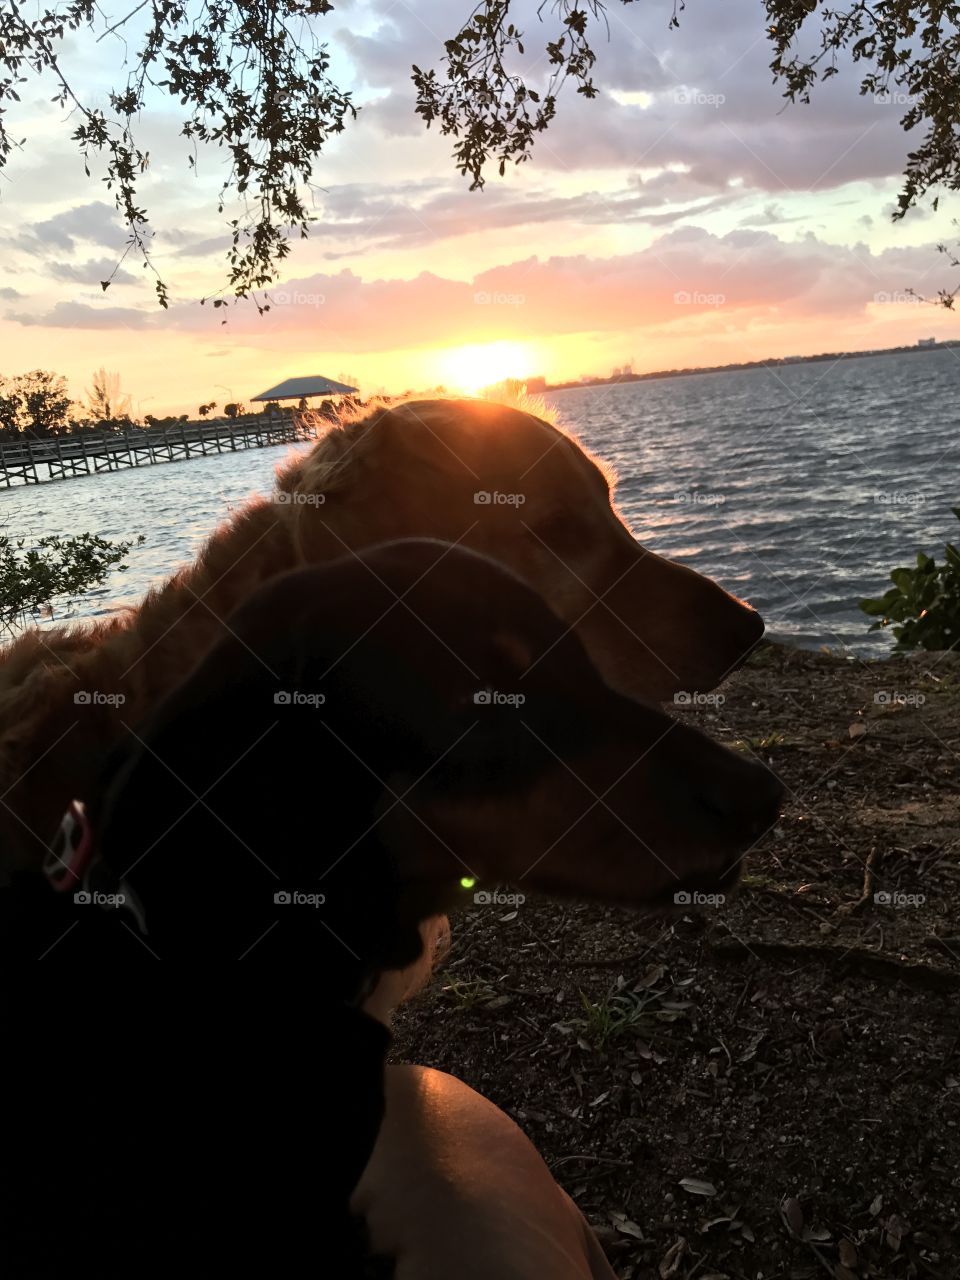 Dogs like sunsets too